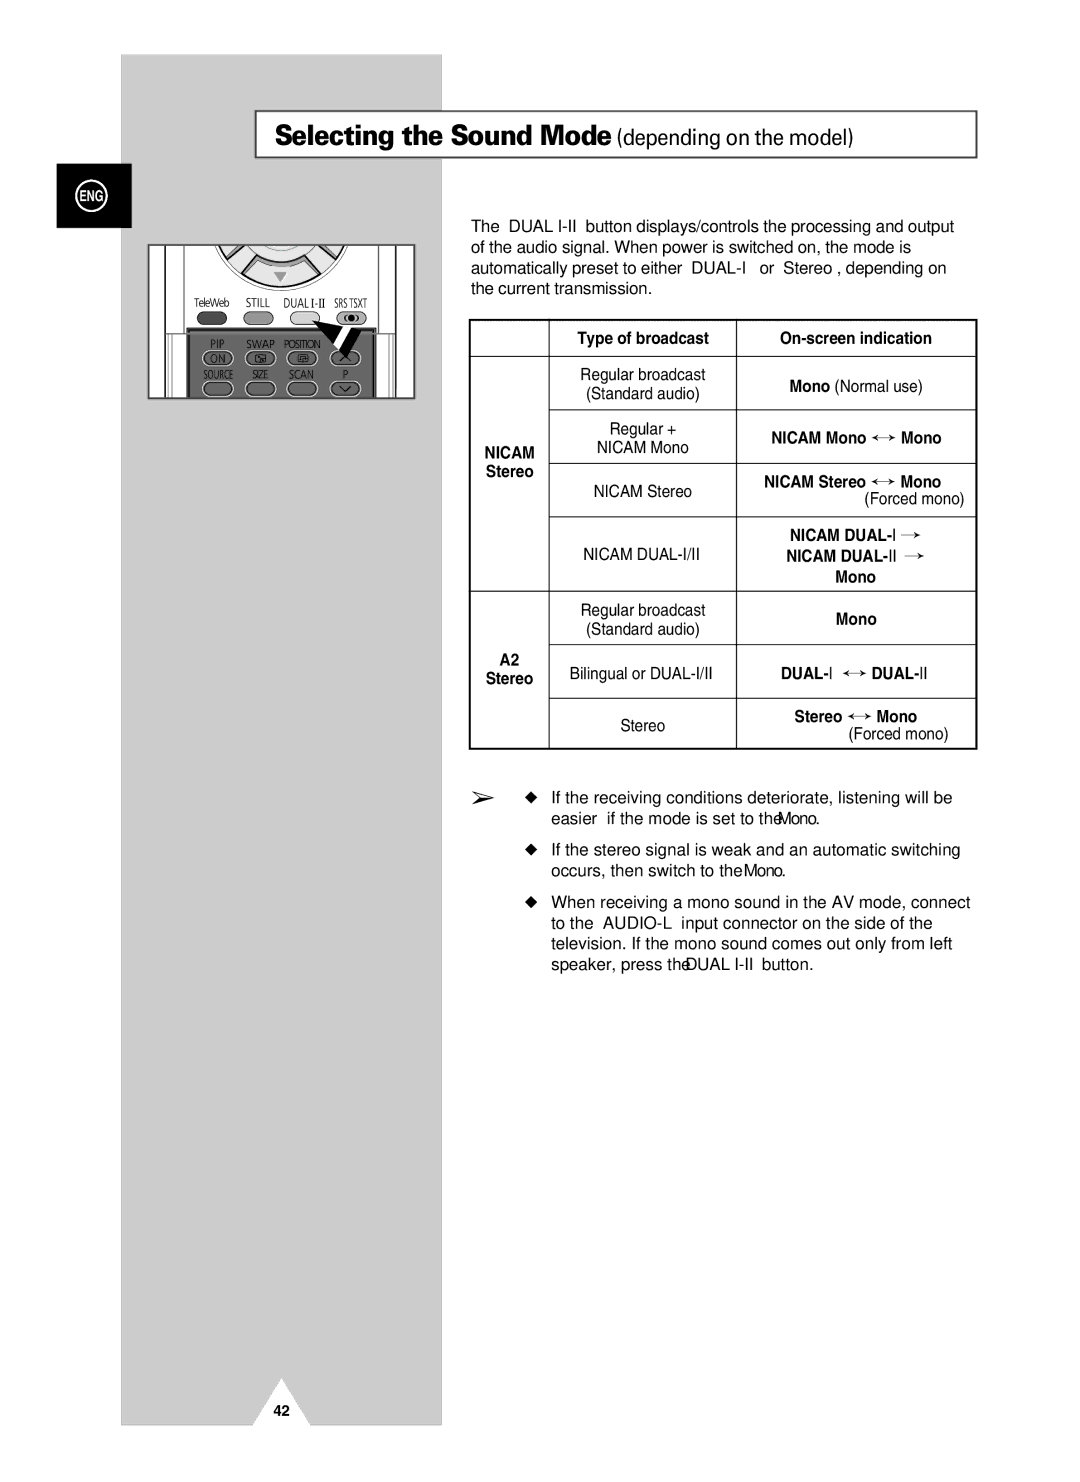 Samsung PS-37S4A manual Selecting the Sound Mode depending on the model 